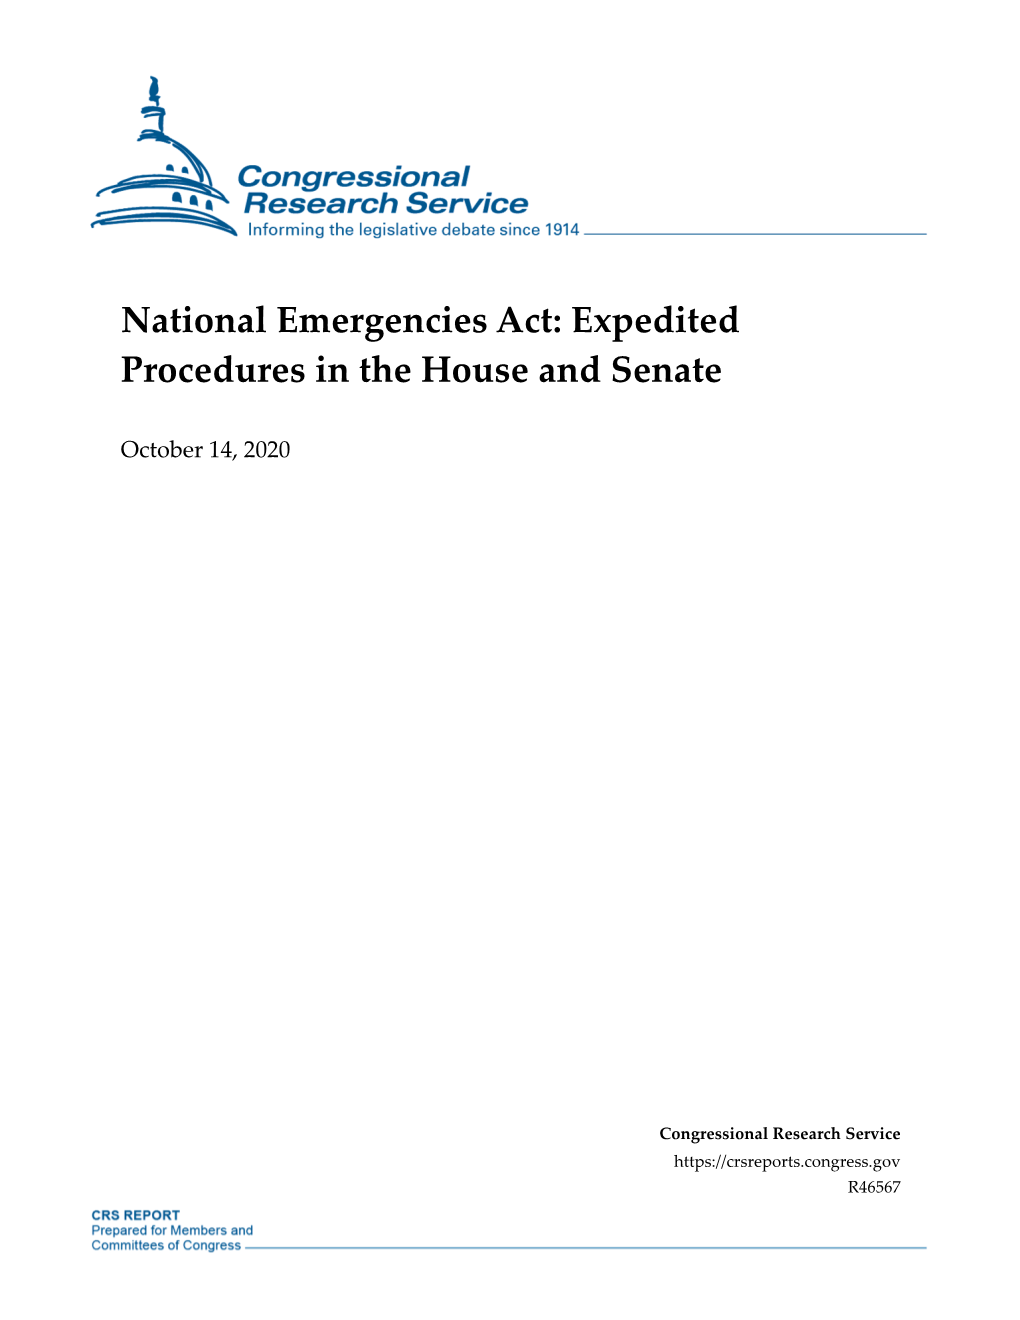 National Emergencies Act: Expedited Procedures in the House and Senate